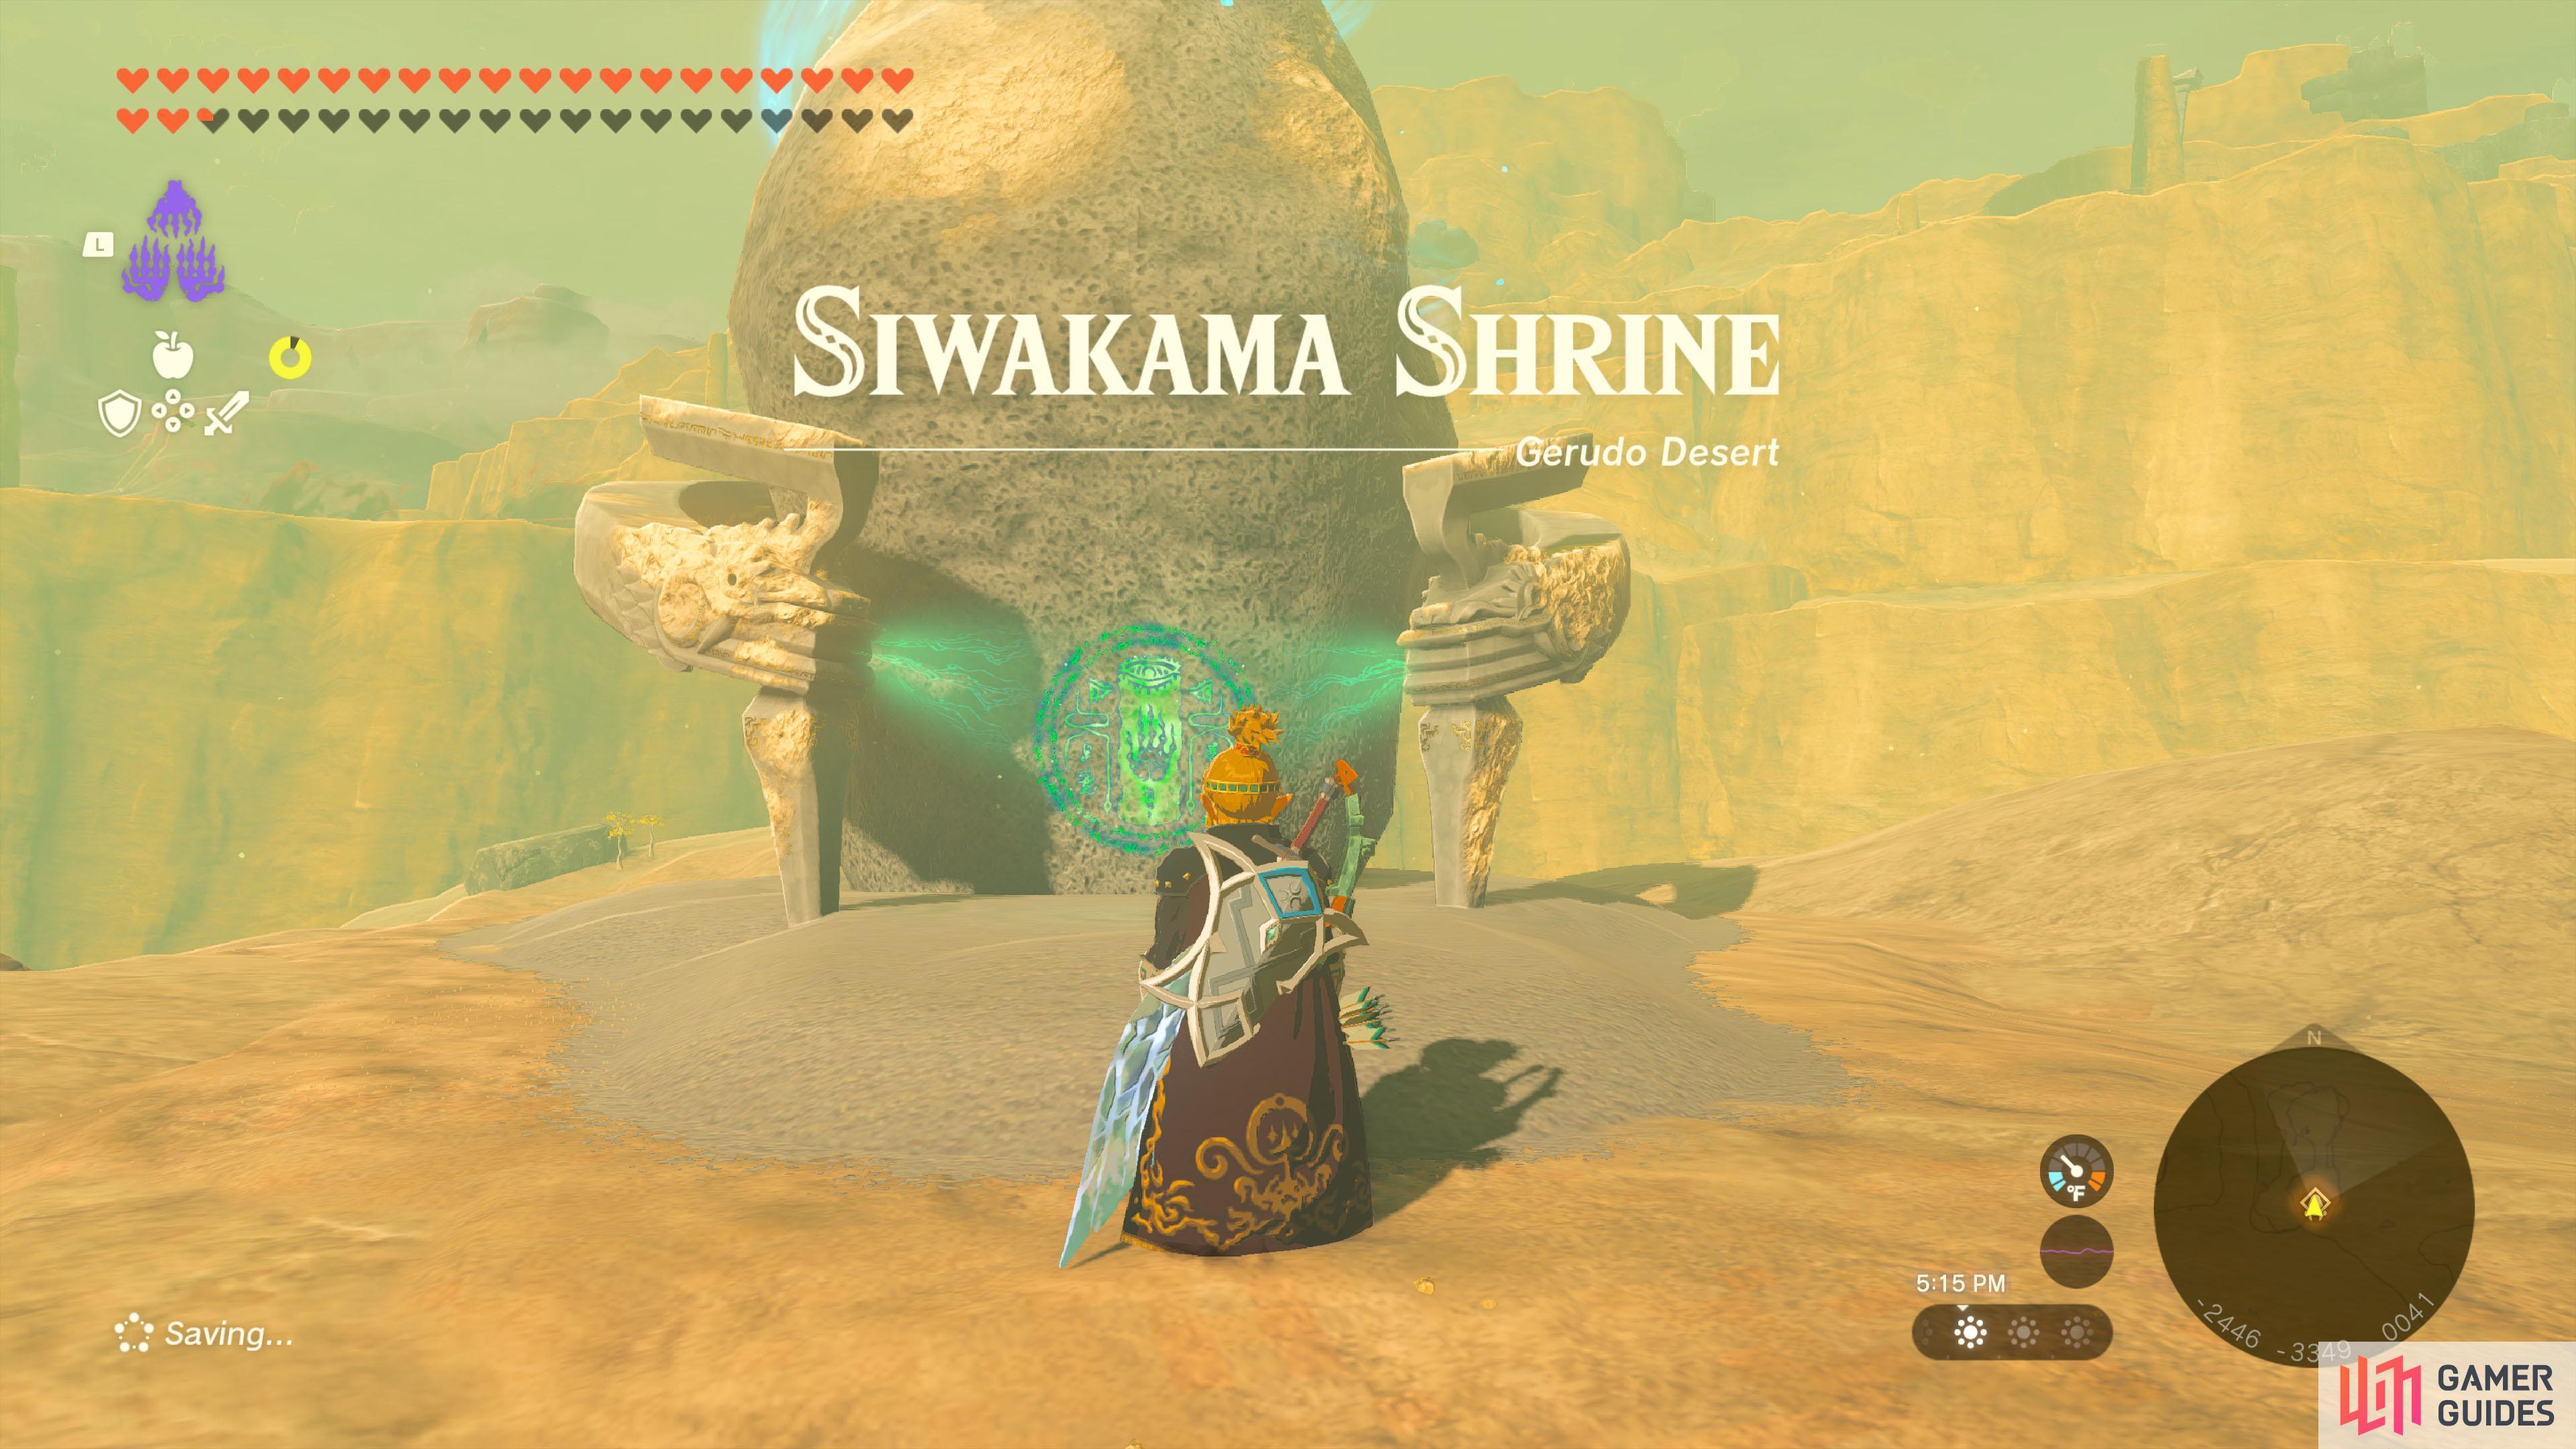 Siwakama Shrine is found in the eastern section of the Gerudo Desert.